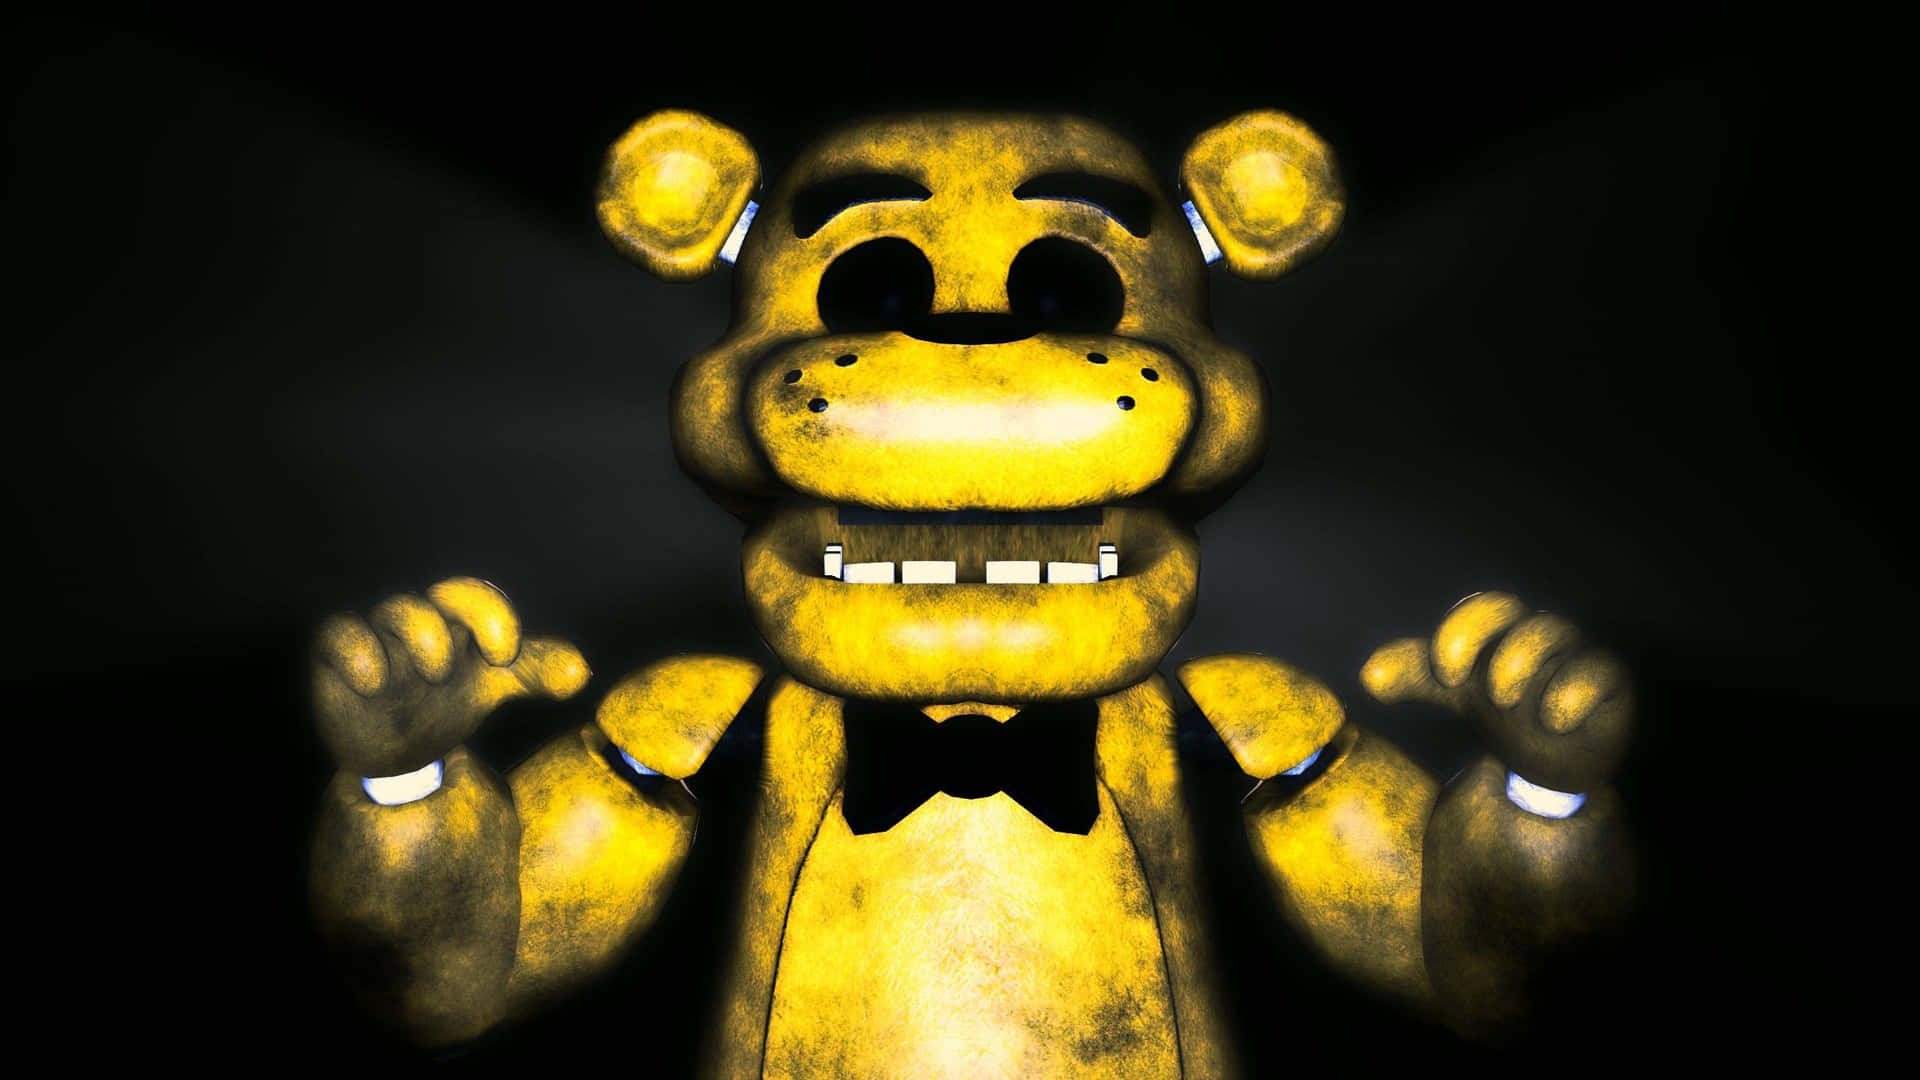 Mysterious Golden Freddy in the shadows Wallpaper